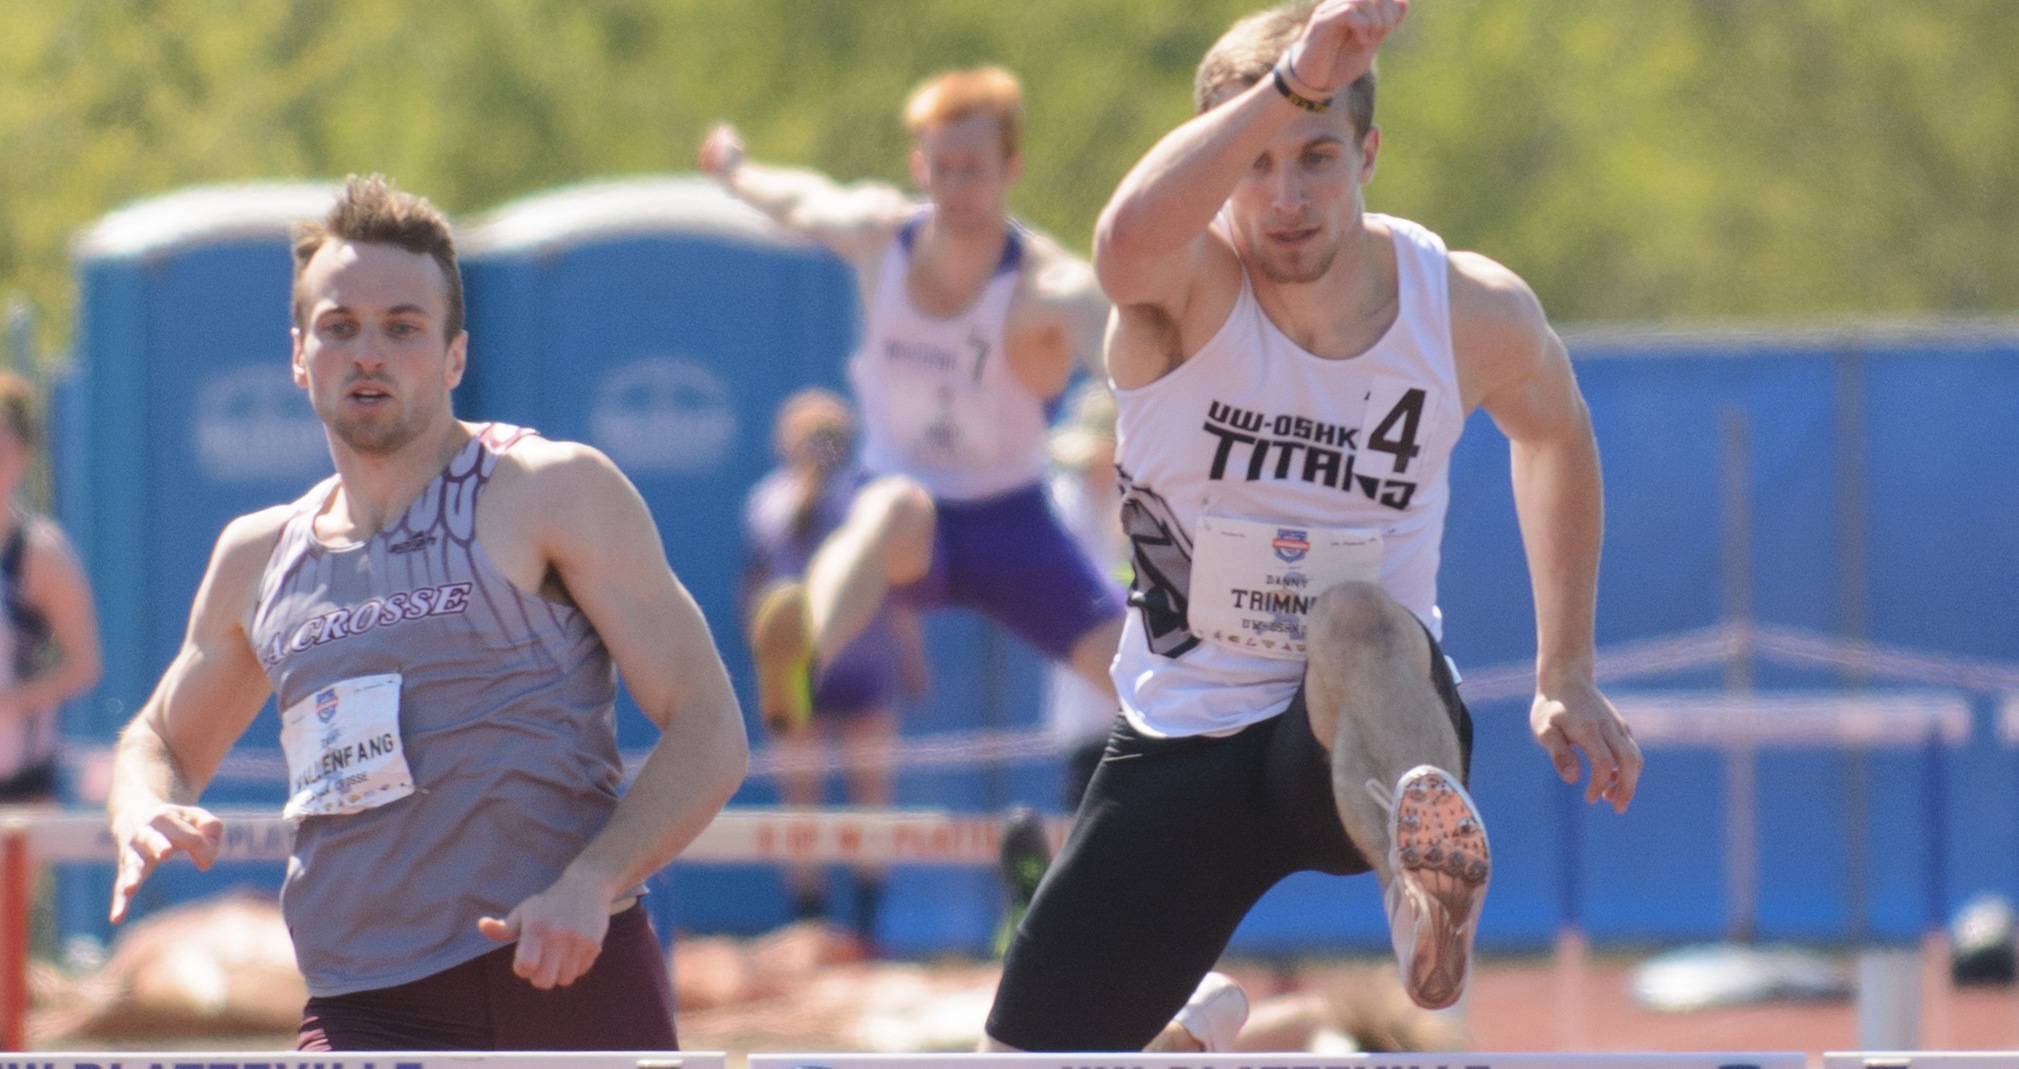 Powers, Trimner All-Americans At NCAA Outdoor Championship